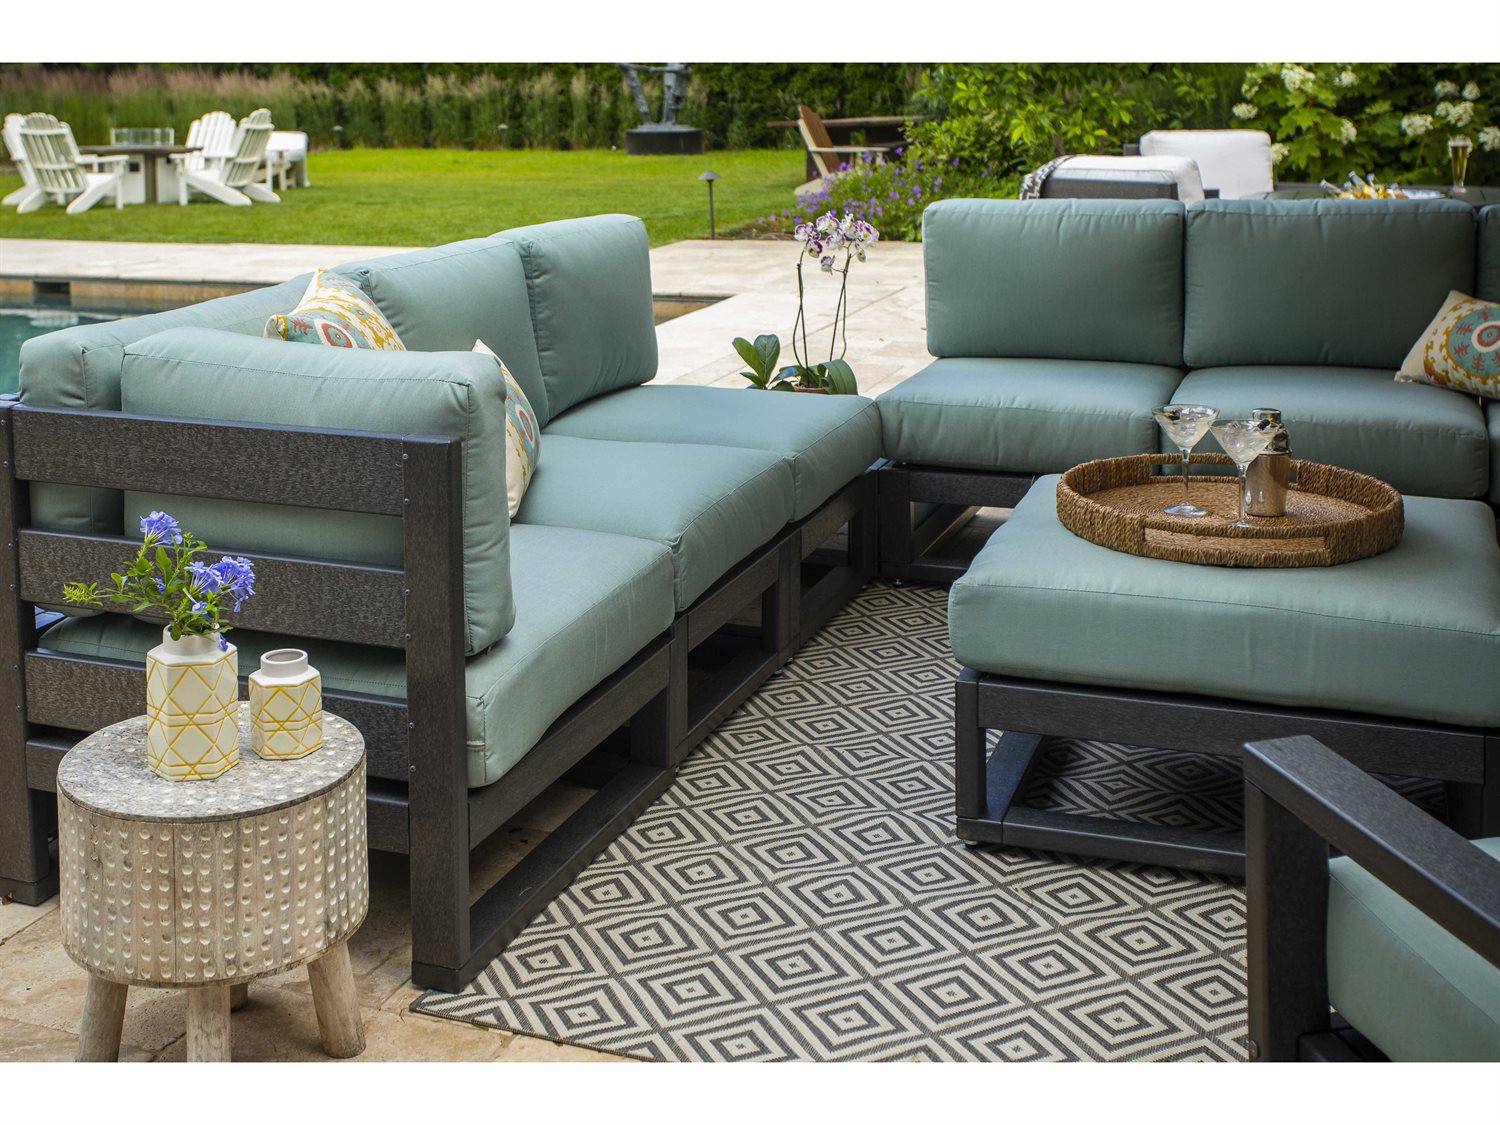 Breezesta Palm Beach Recycled Sectional Lounge Set |